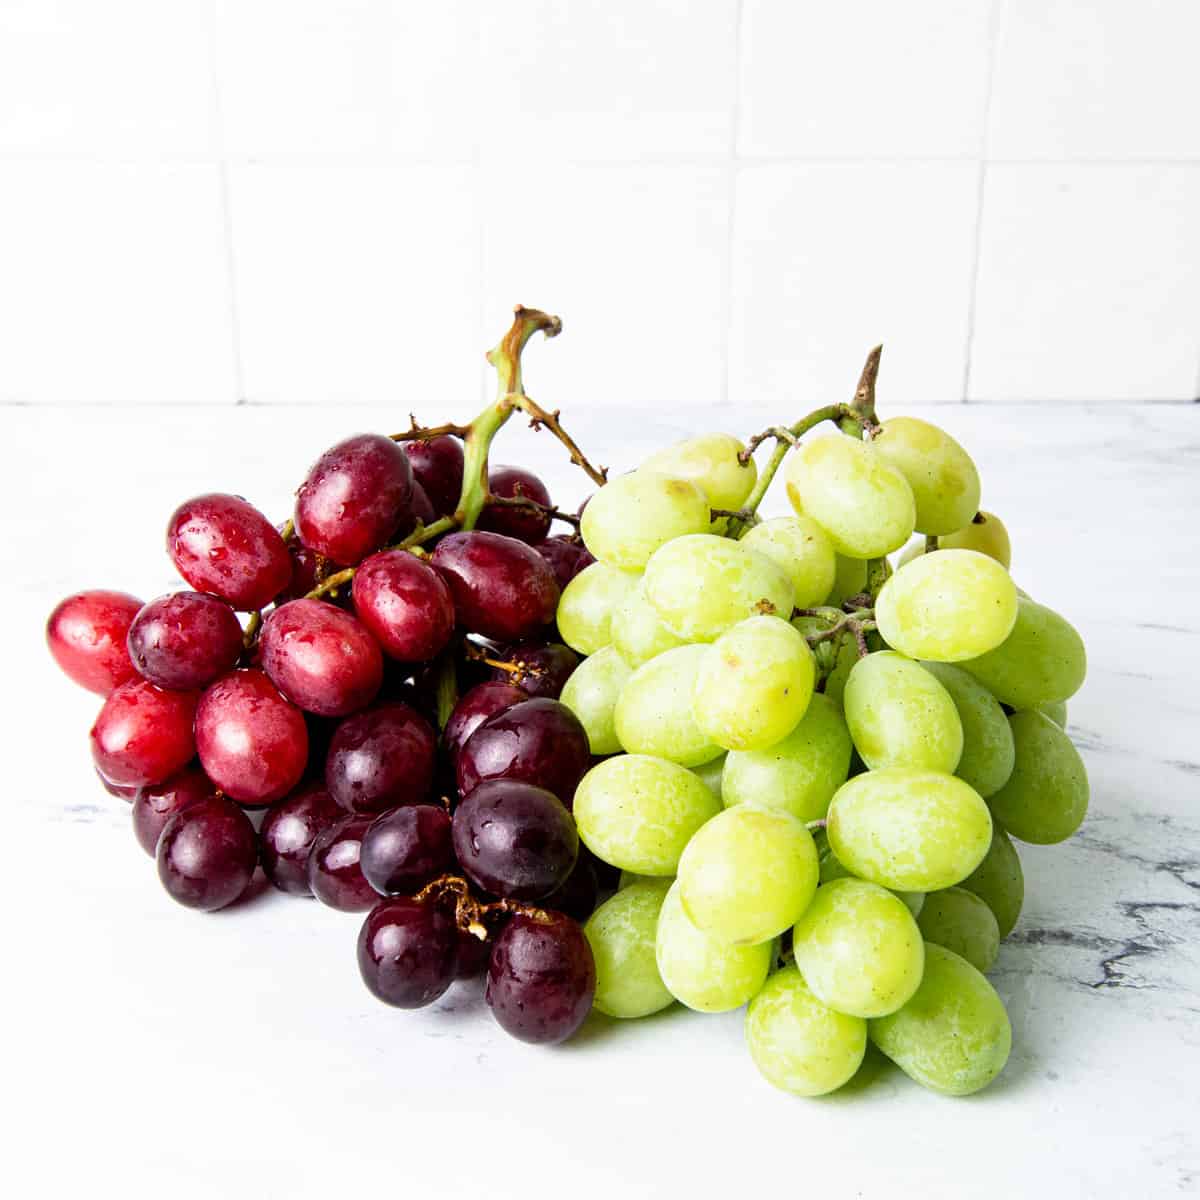 Red and green grapes on the counter.